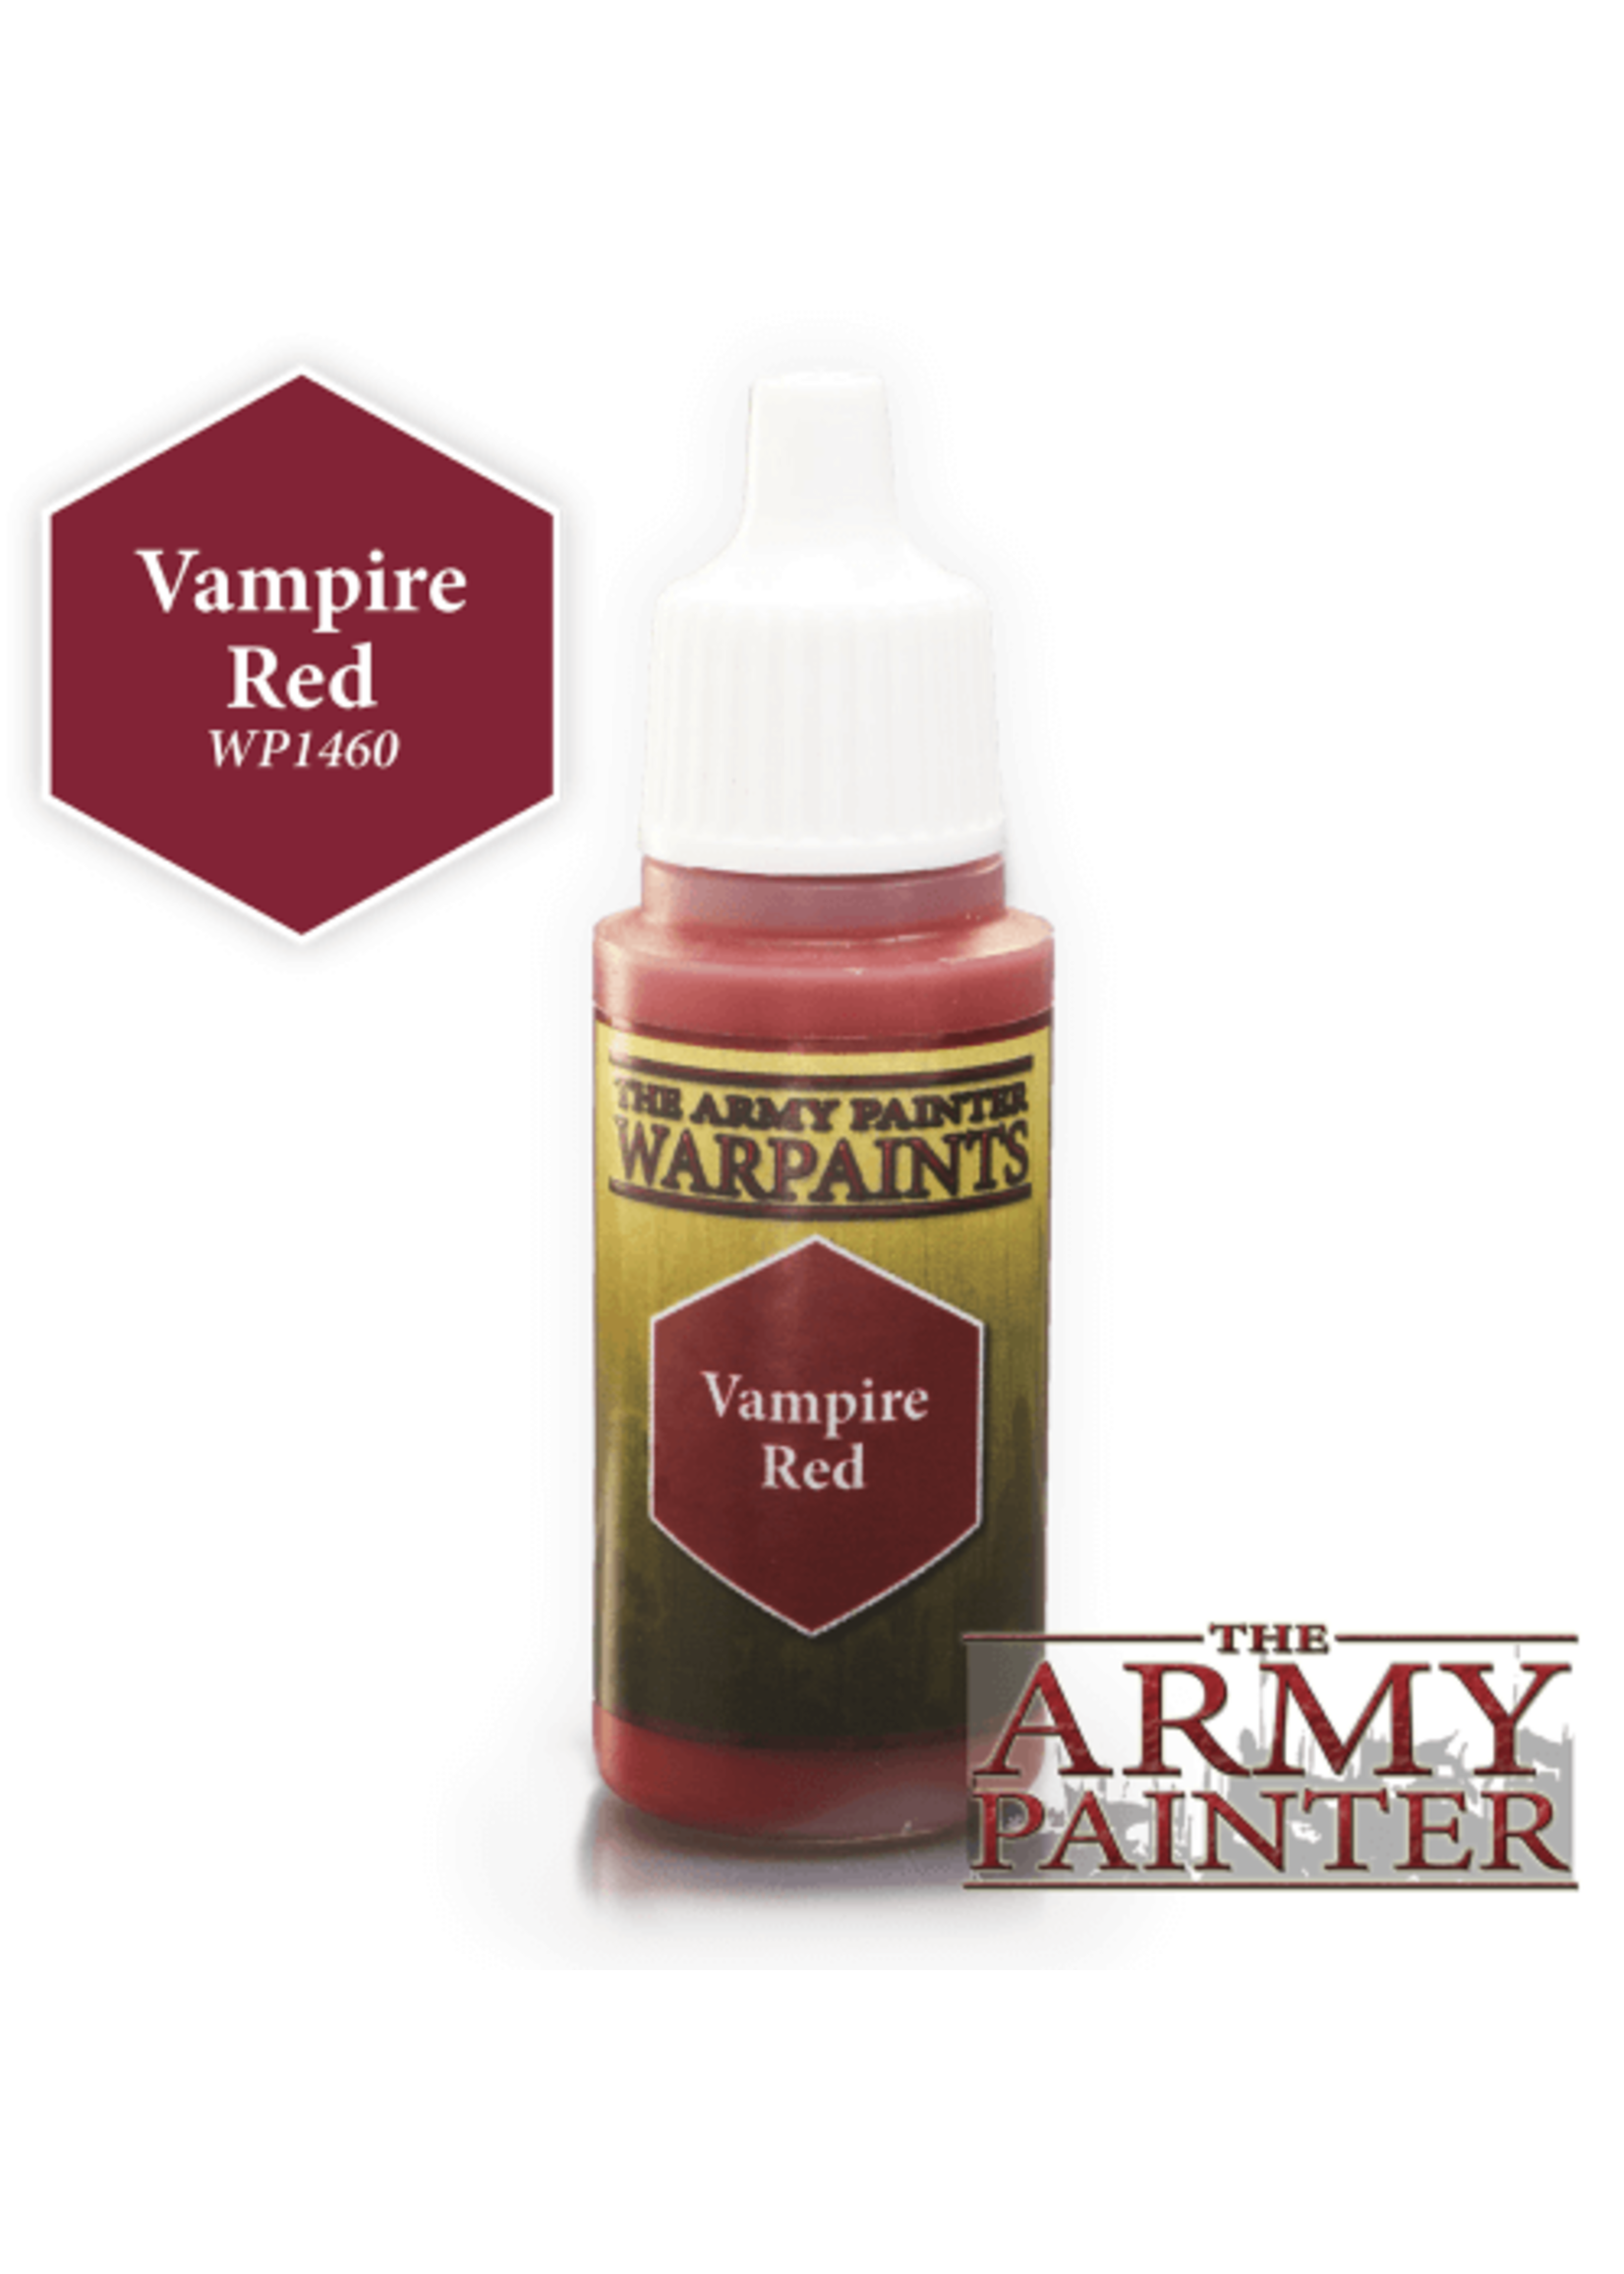 The Army Painter Acrylics Warpaints Vampire Red